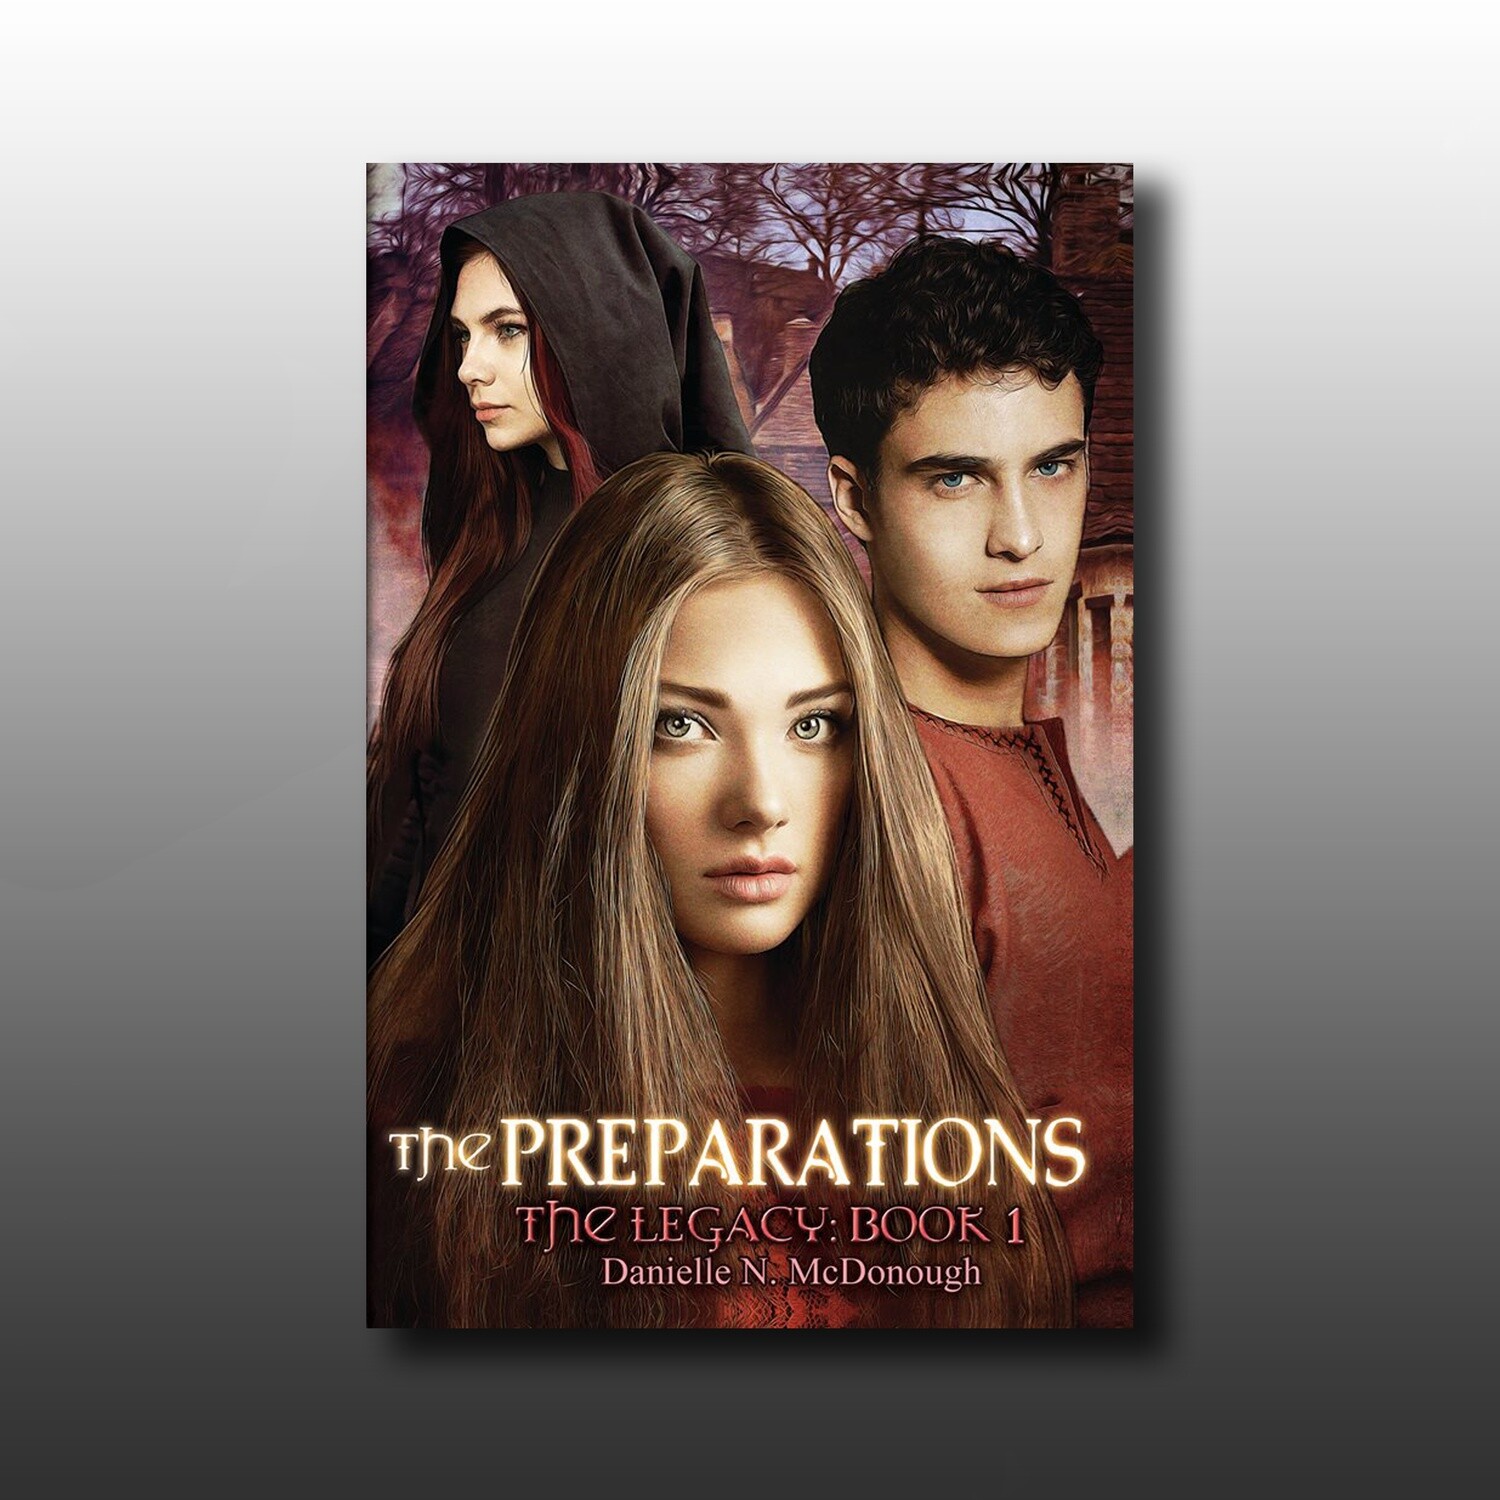 Book 1: The Preparations